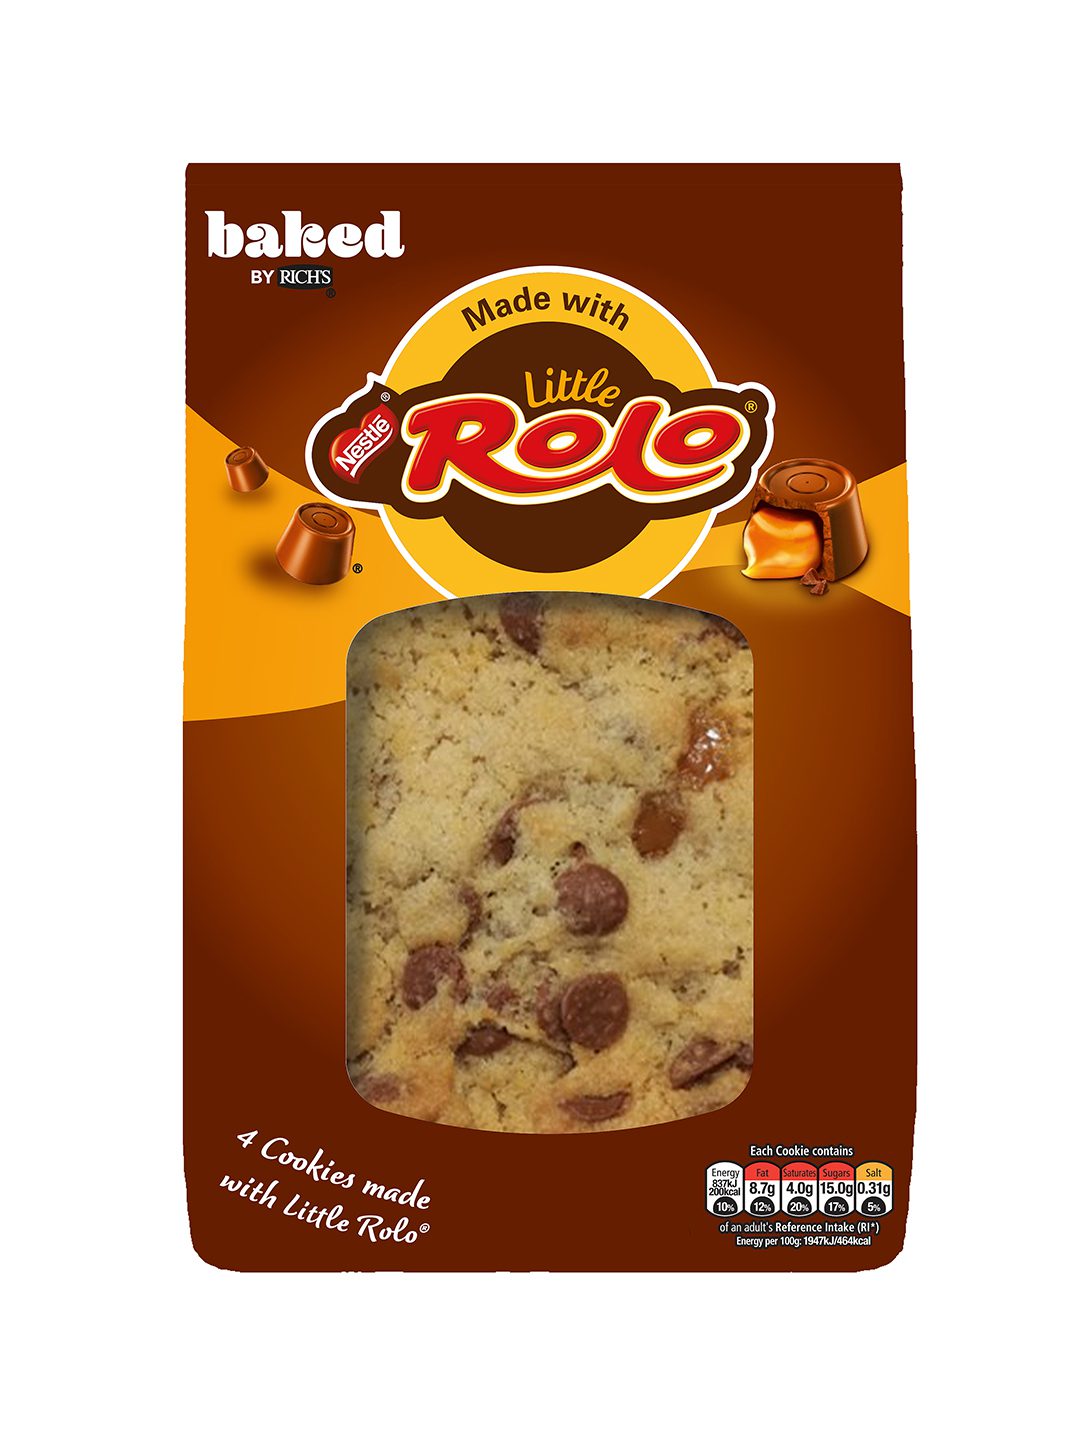 Baked by Rich's Little Rolo cookies